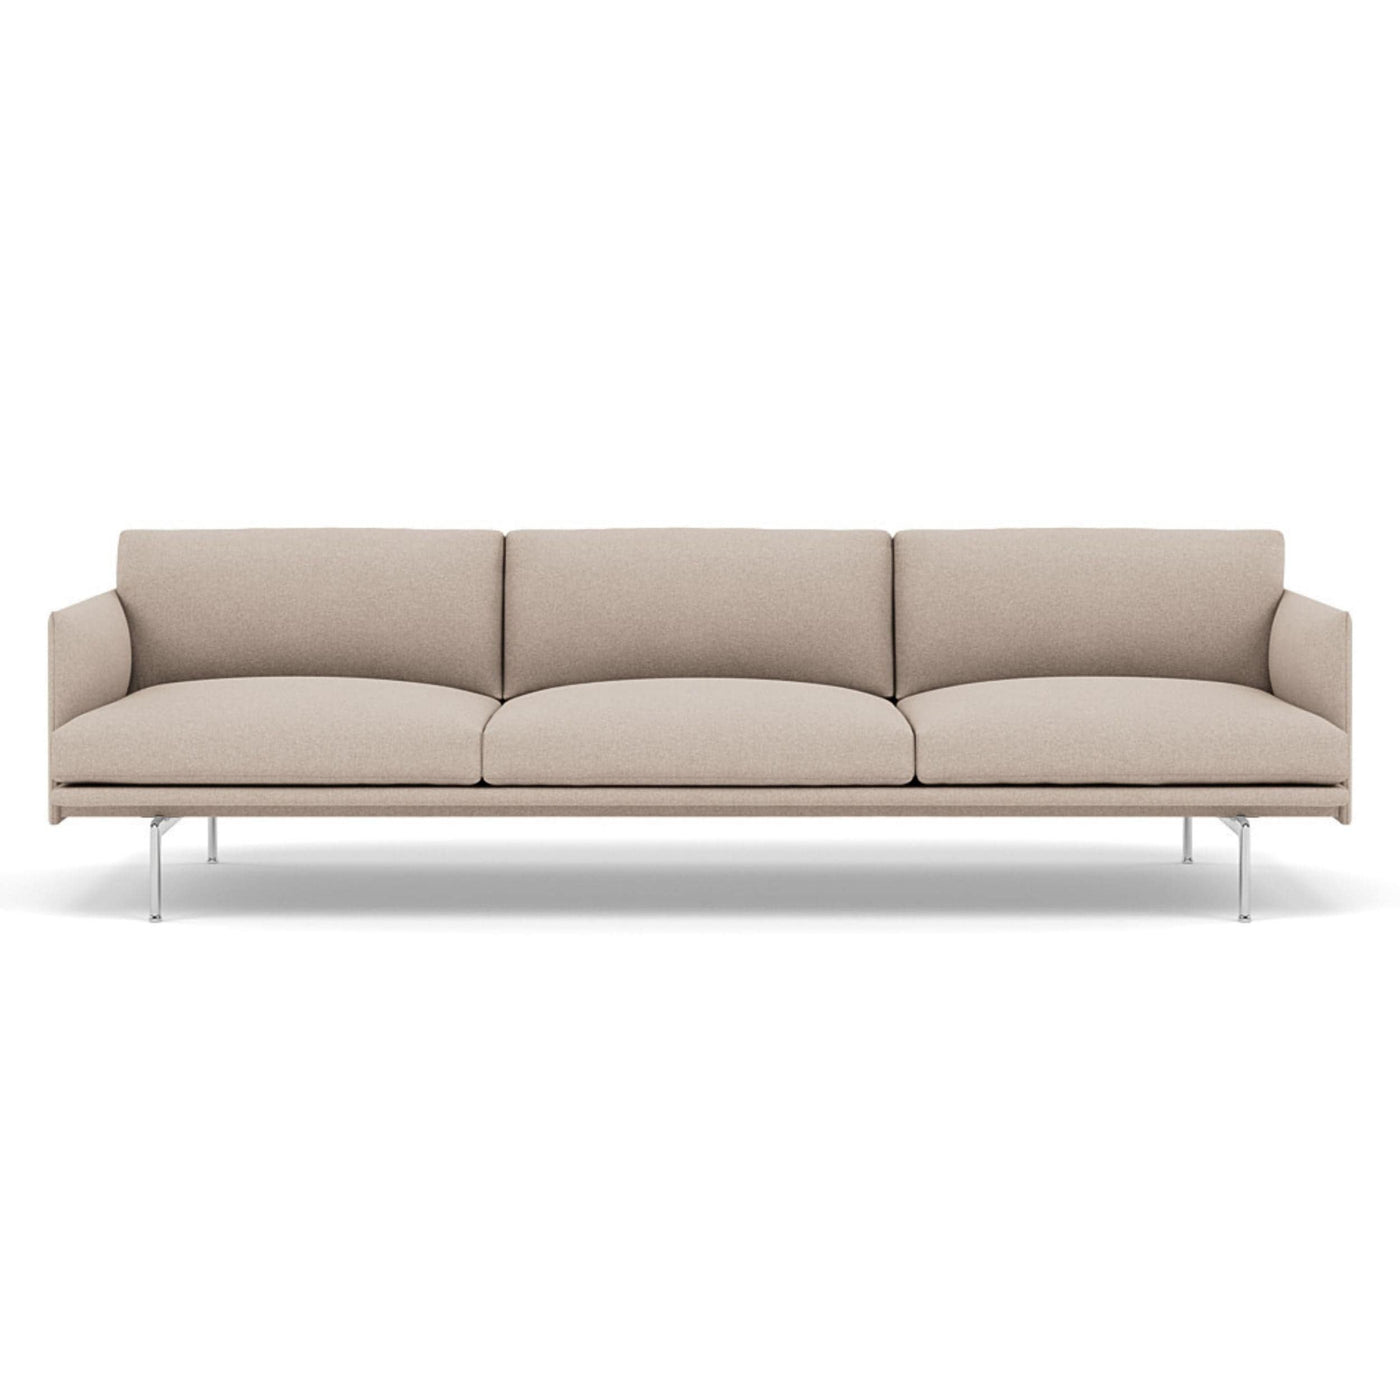 muuto outline 3.5 seater sofa in divina md 213 natural and polished aluminium legs. Made to order from someday designs. #colour_divina-md-213-natural